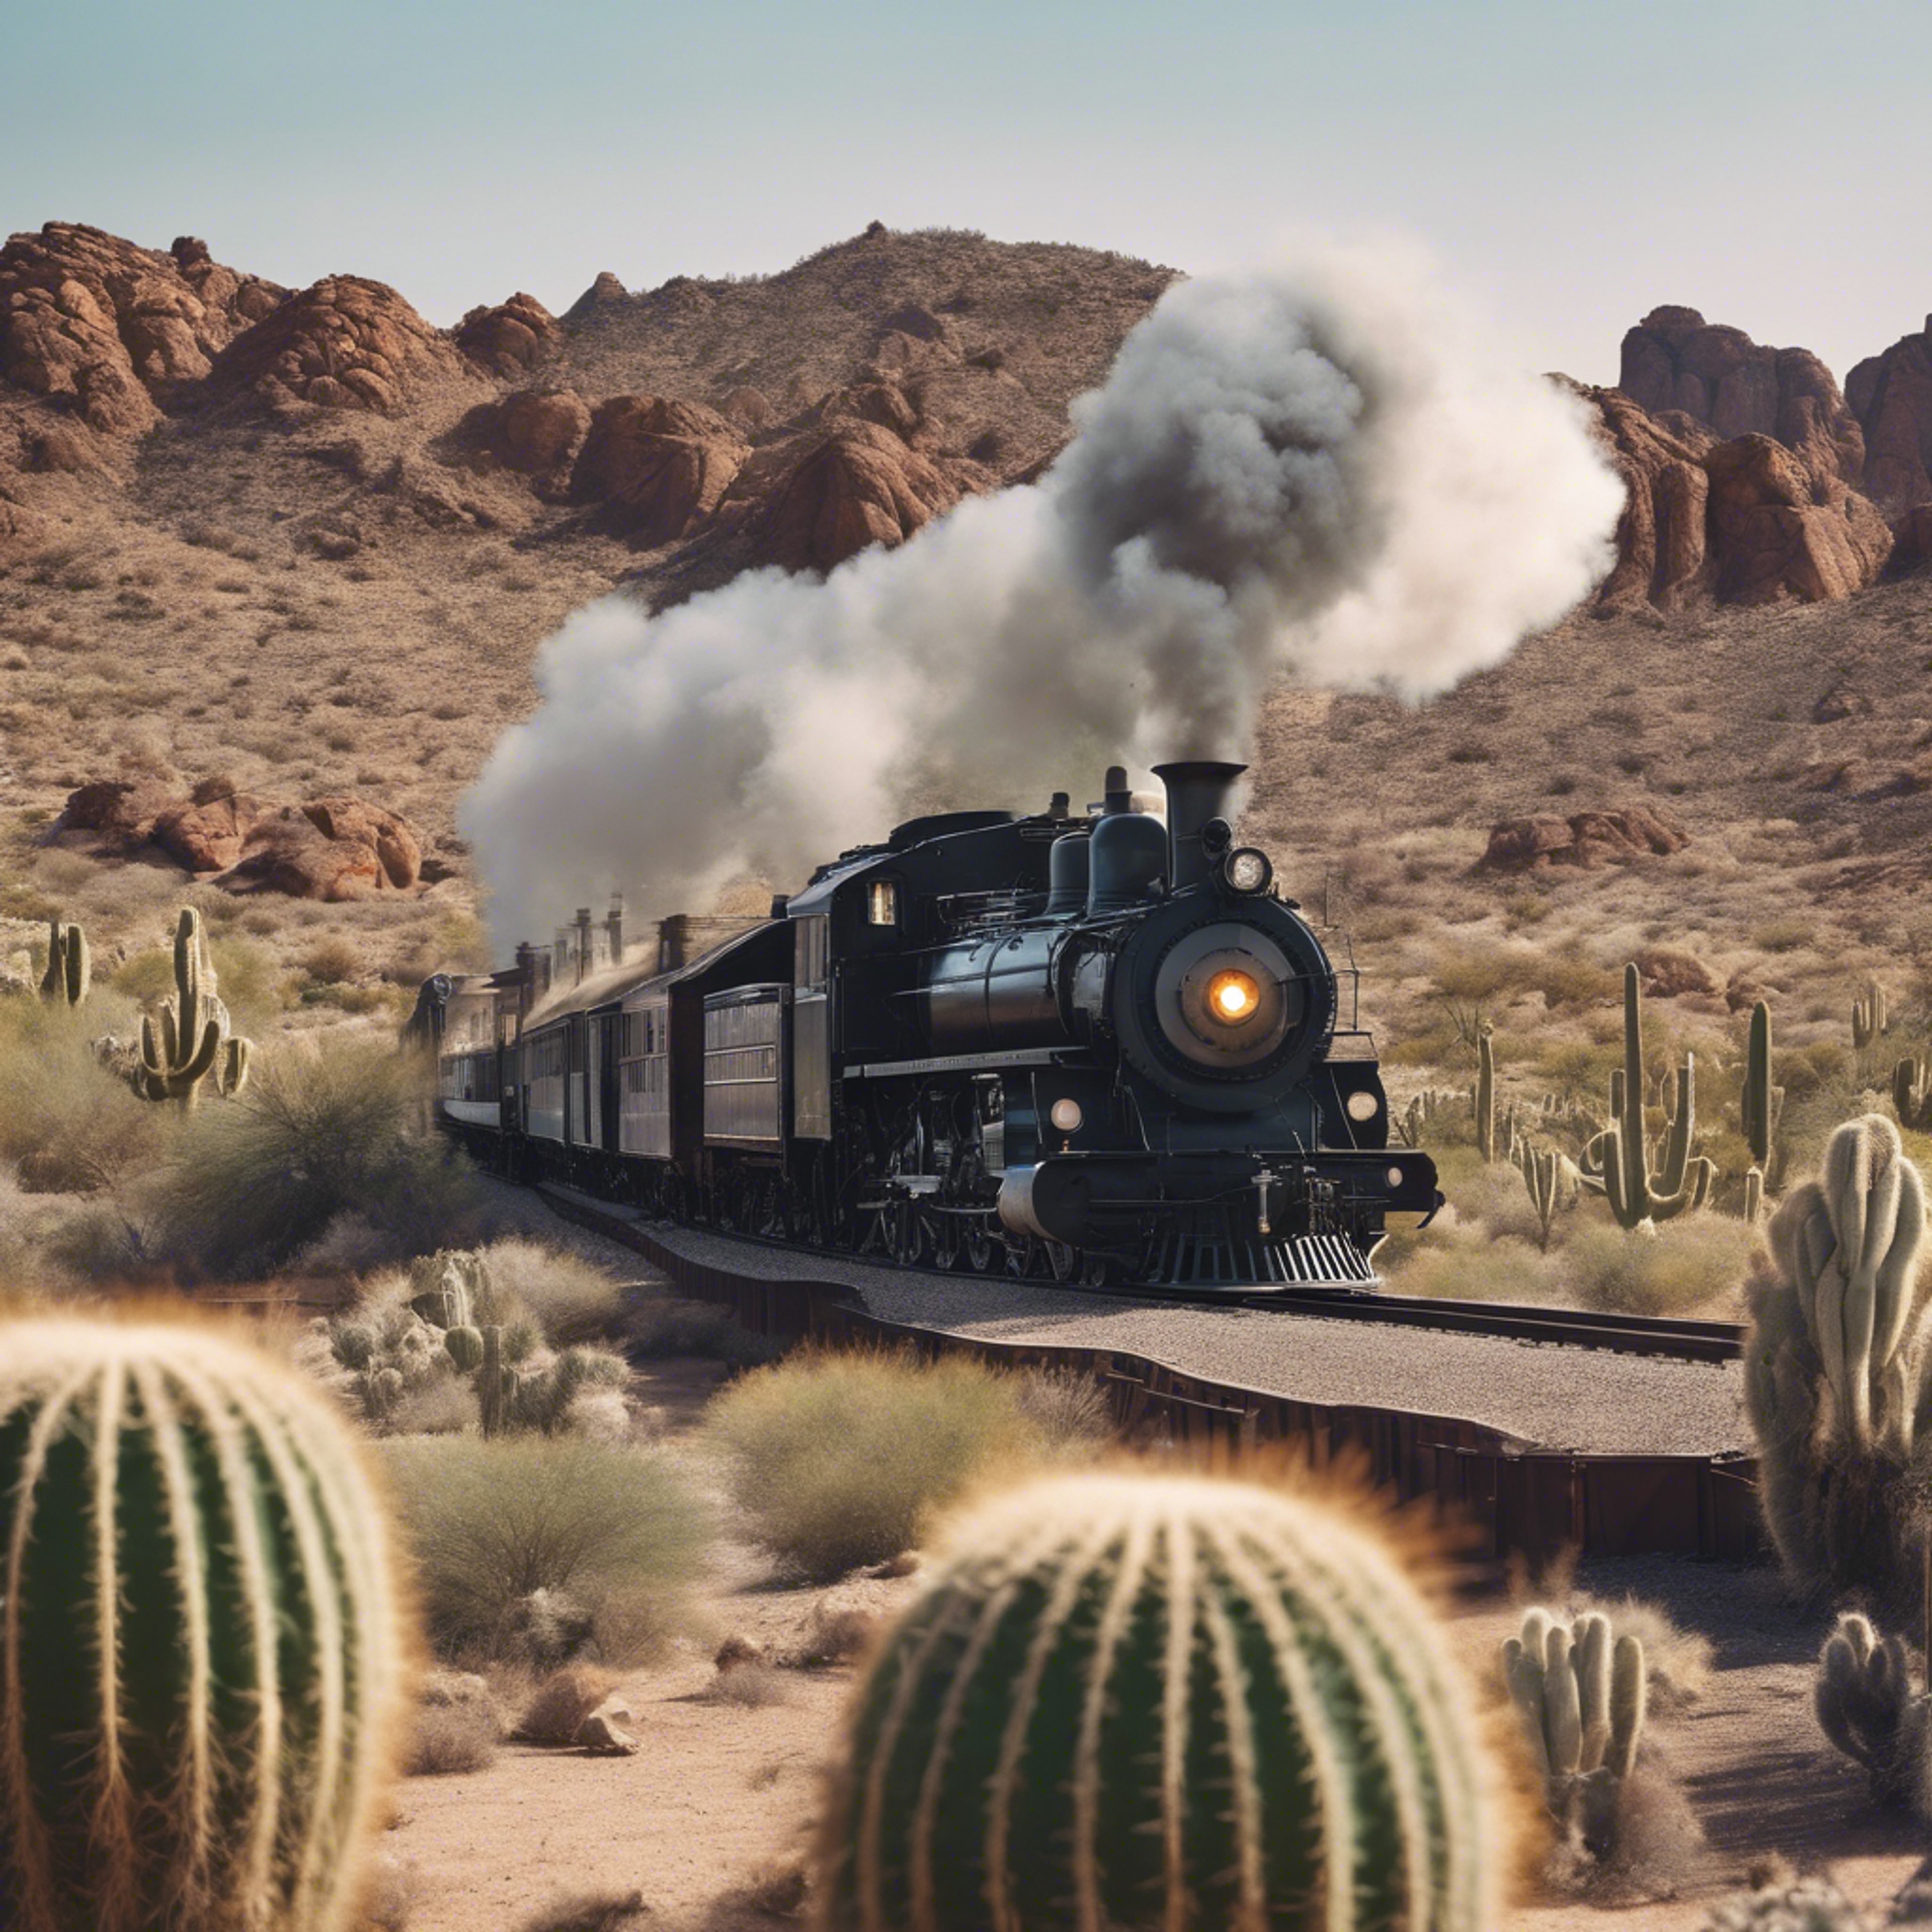 A locomotive steam train rushing across the barren Western landscape surrounded by towering cacti. Tapeta[f5a4930d44454dd795f5]